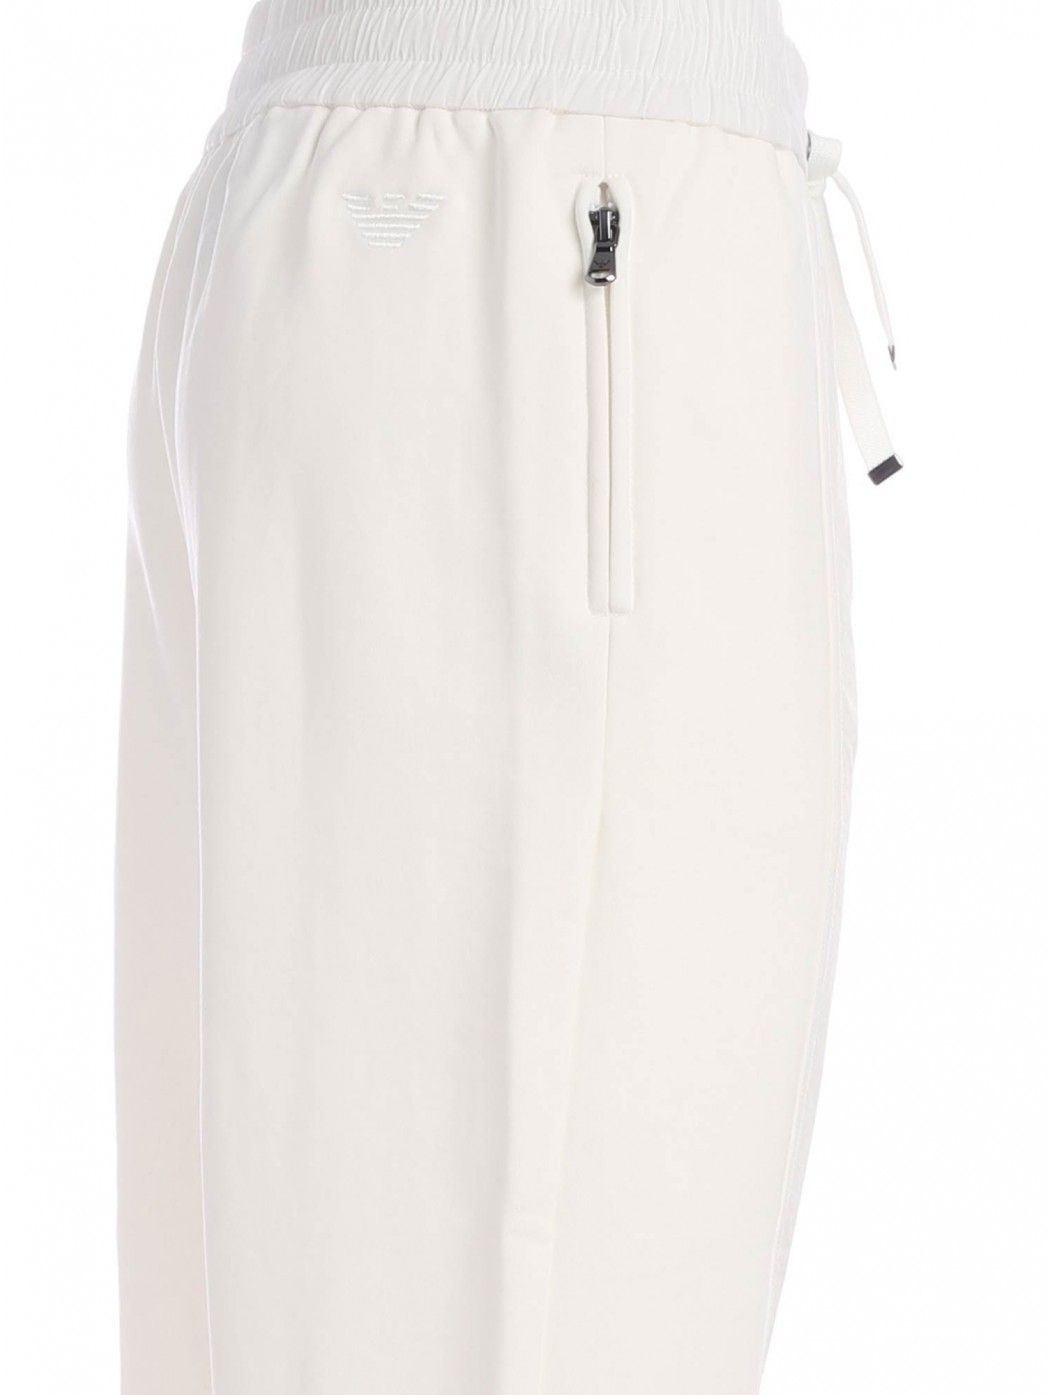 Cotton blend trousers Color: white Side pockets with zip Elasticated waist and bottom Tone-on-tone logo embroidery on the back D